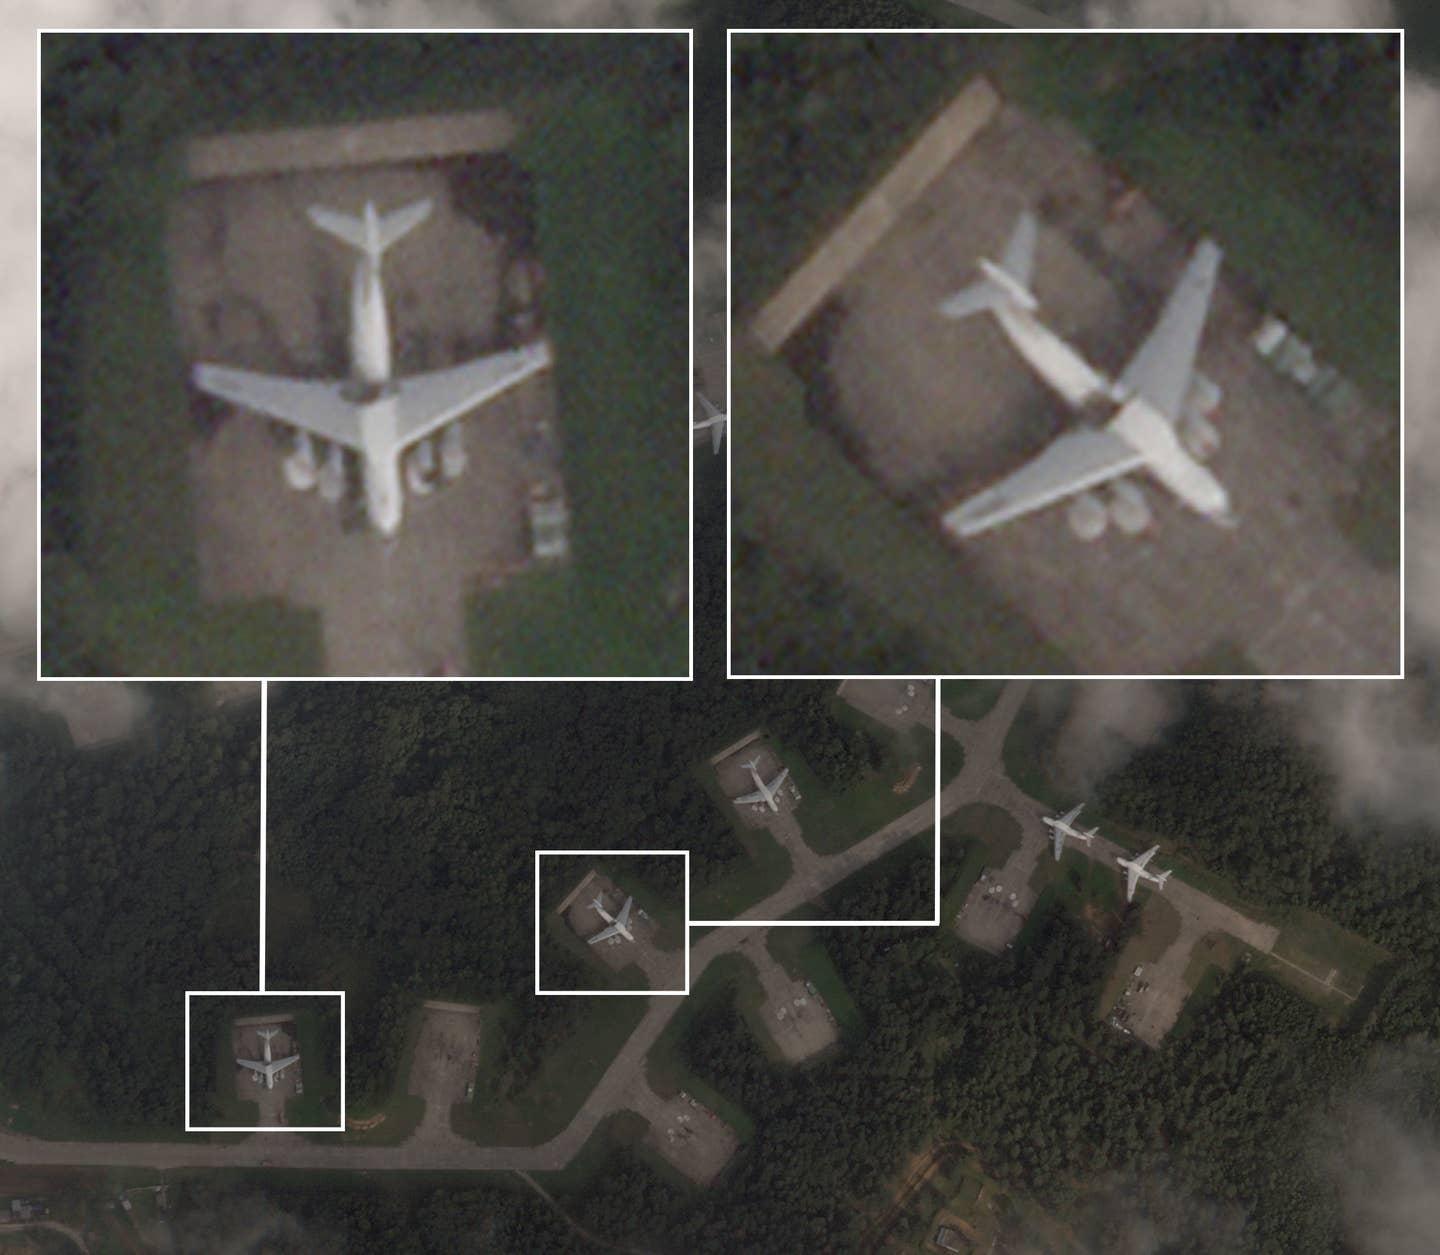 Two Russian IL-76 Candid transport jets show damage where the wings meet the fuselage during a Ukrainian drone attack on Kresty Air Base in Pskov, Russia. This is the image taken earlier this morning that had cloud cover obscuring much of the base.&nbsp;&nbsp;<em>PHOTO © 2023 PLANET LABS INC. ALL RIGHTS RESERVED. REPRINTED BY PERMISSION</em>